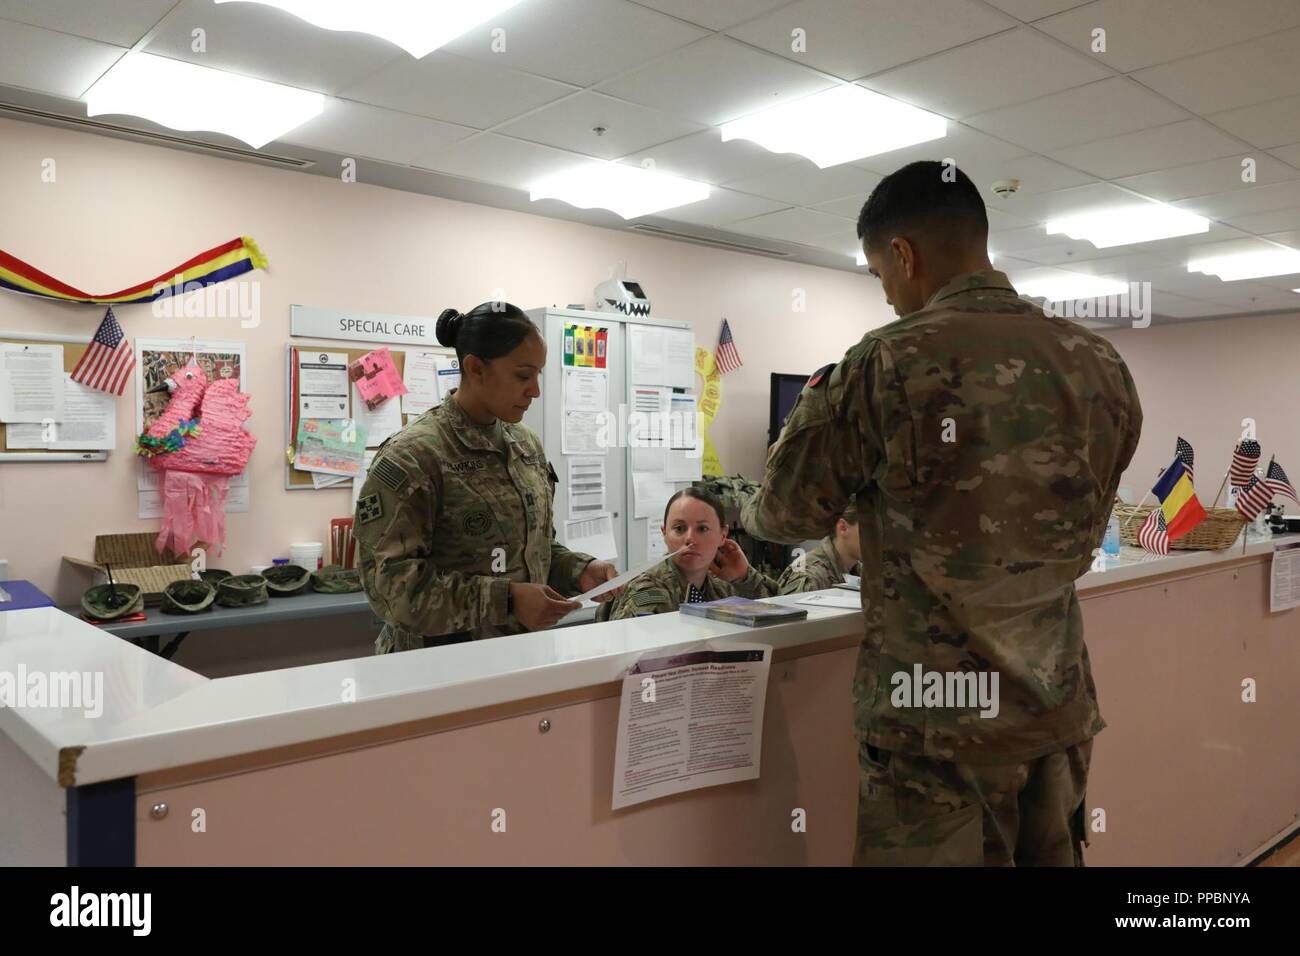 KANDAHAR, Afghanistan — Capt. Jennifer Hawkins, medical provider for 1st Battalion, 12th Infantry Regiment, 2nd Infantry Brigade Combat Team, 4th Infantry Division, reviews paperwork with her Soldiers, Aug. 13, 2018, at the Kandahar Airfield NATO Role III Multinational Medical Unit in Kandahar Airfield, Afghanistan. ( Stock Photo